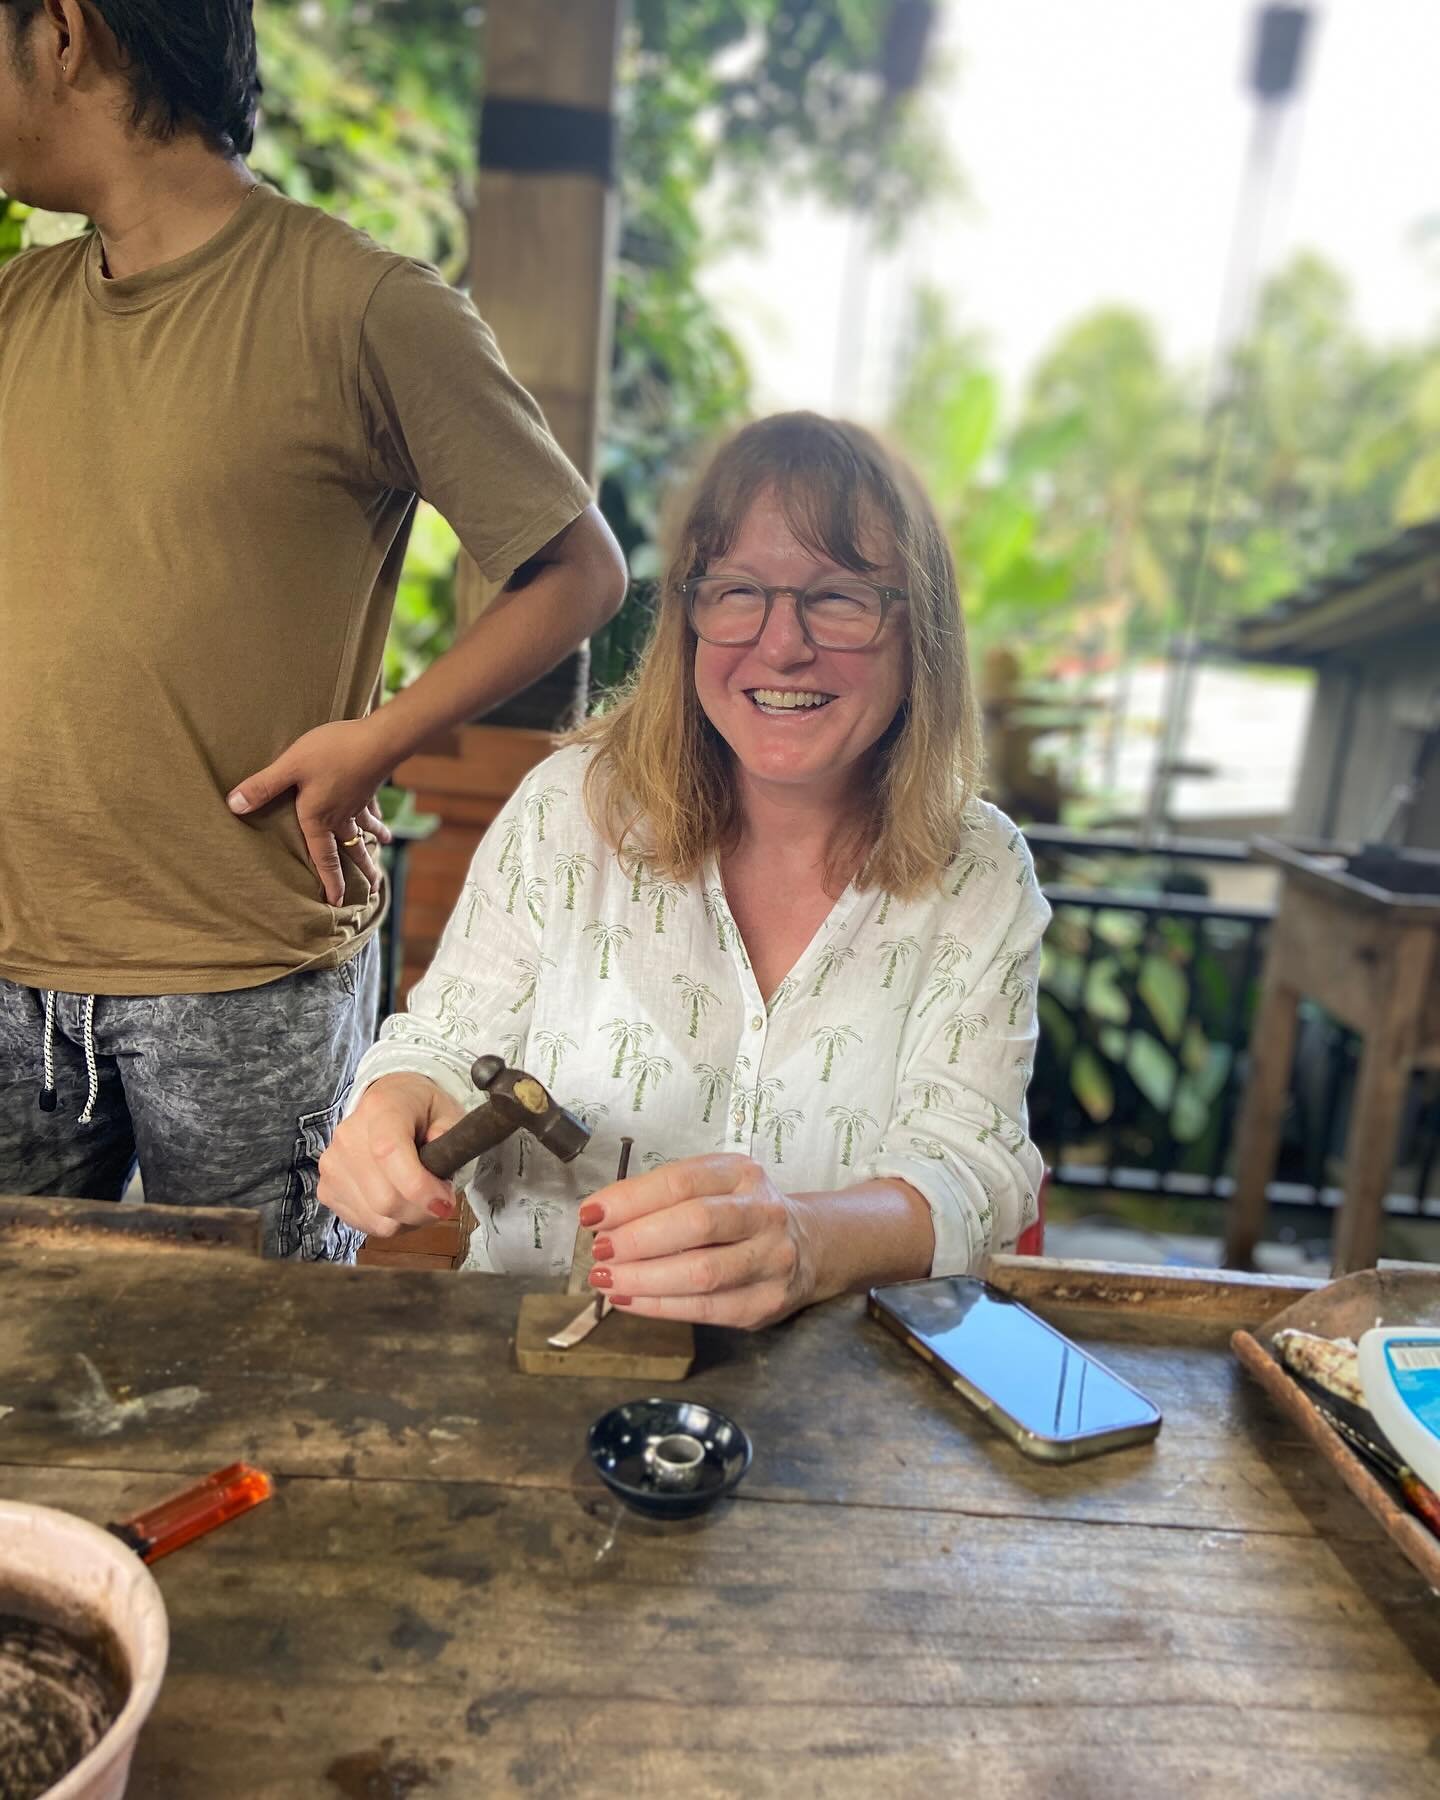 At the last minute we added a Silver Jewelry making class so we surprised the group by telling them when they arrived. We just had a feeling it would be a fun thing to add to the week - and it was! SO MUCH FUN. We got to melt down the silver which fe